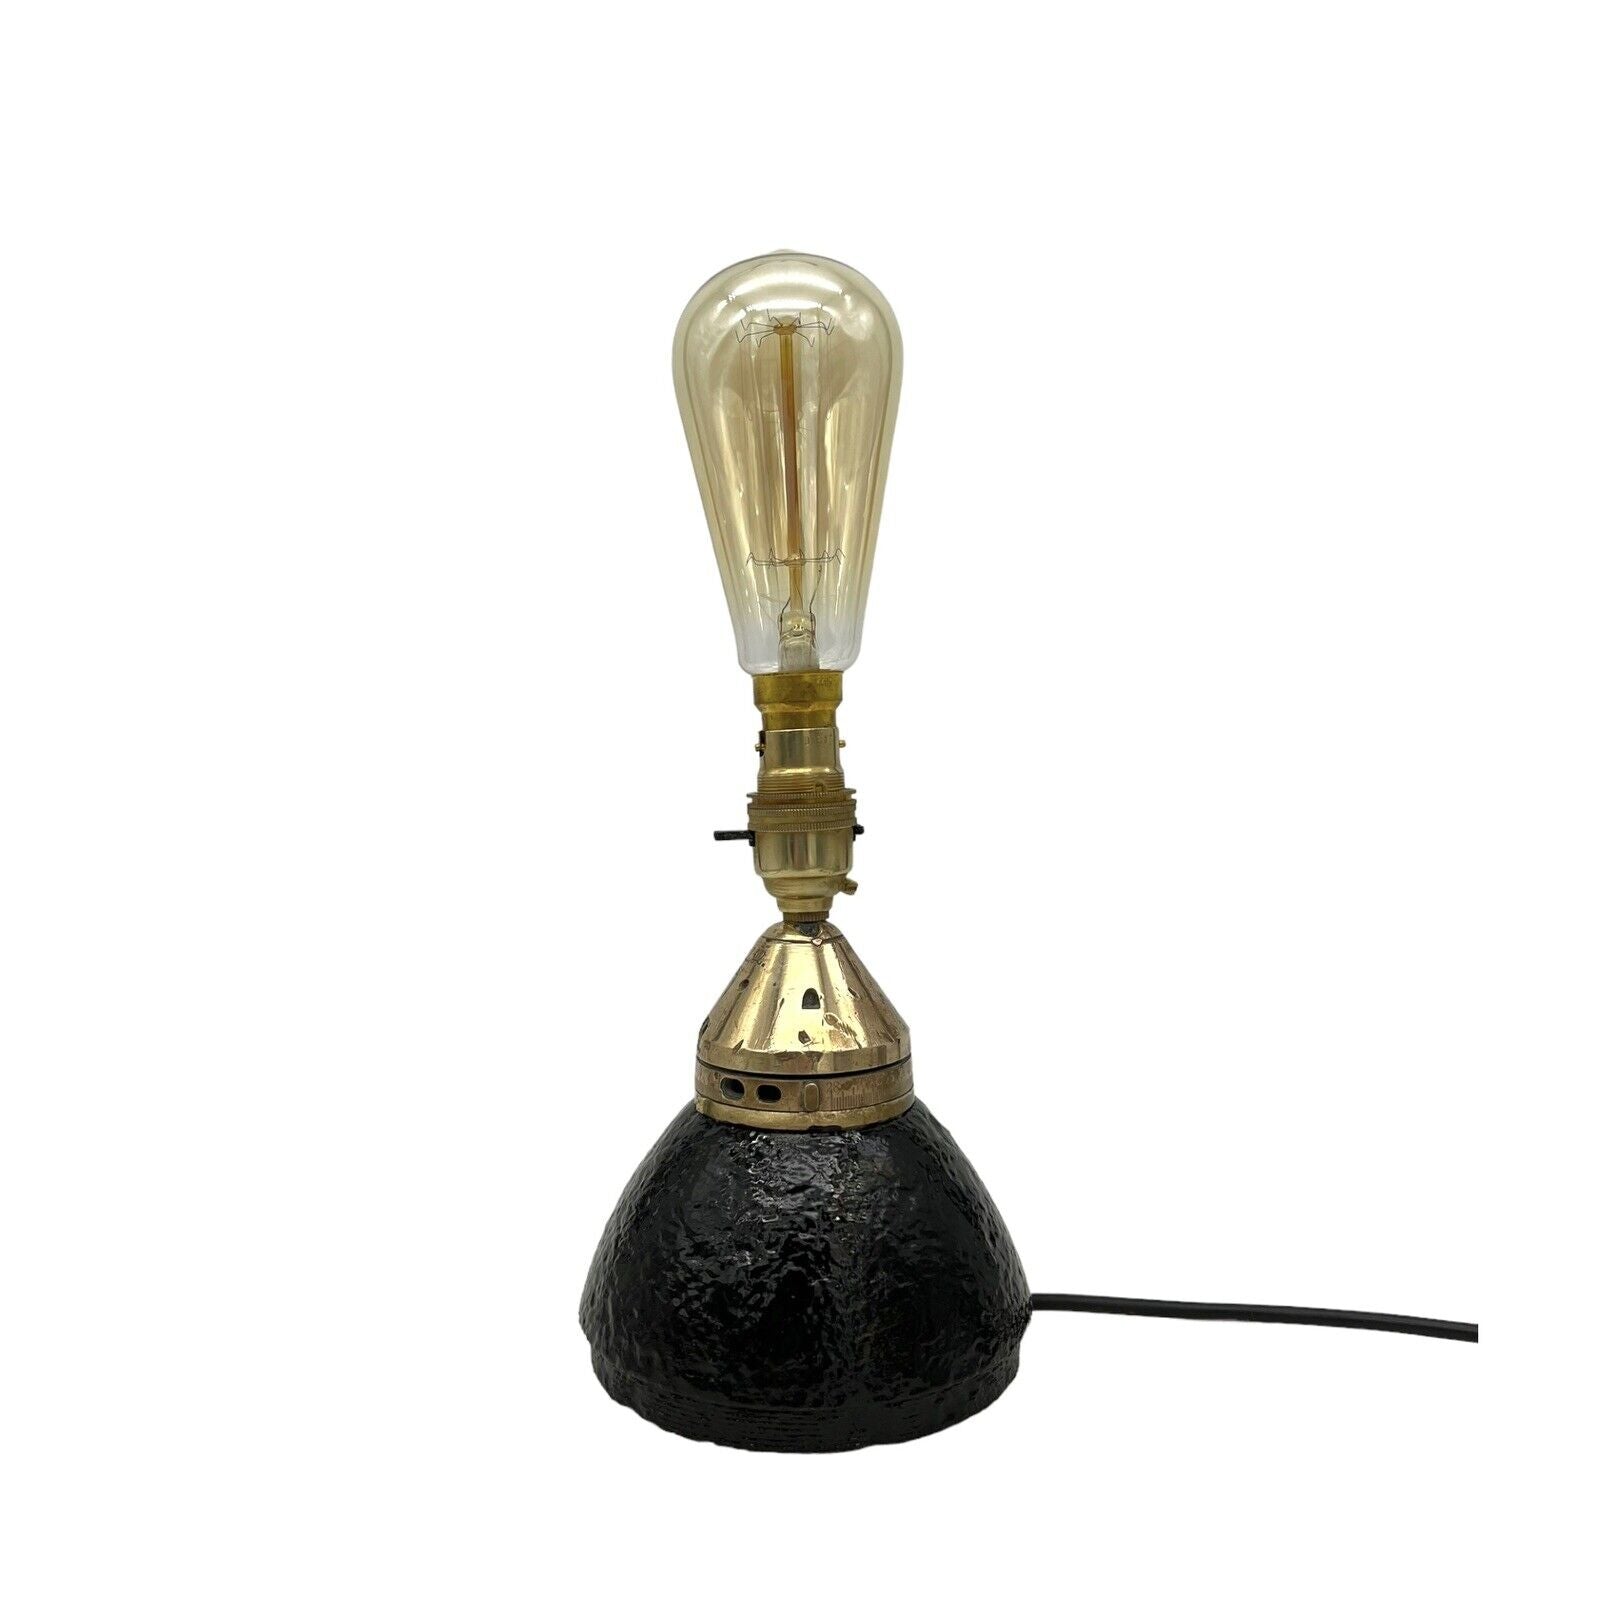 German Dopp Z fuse trench art desk lamp sold by All Things French Store